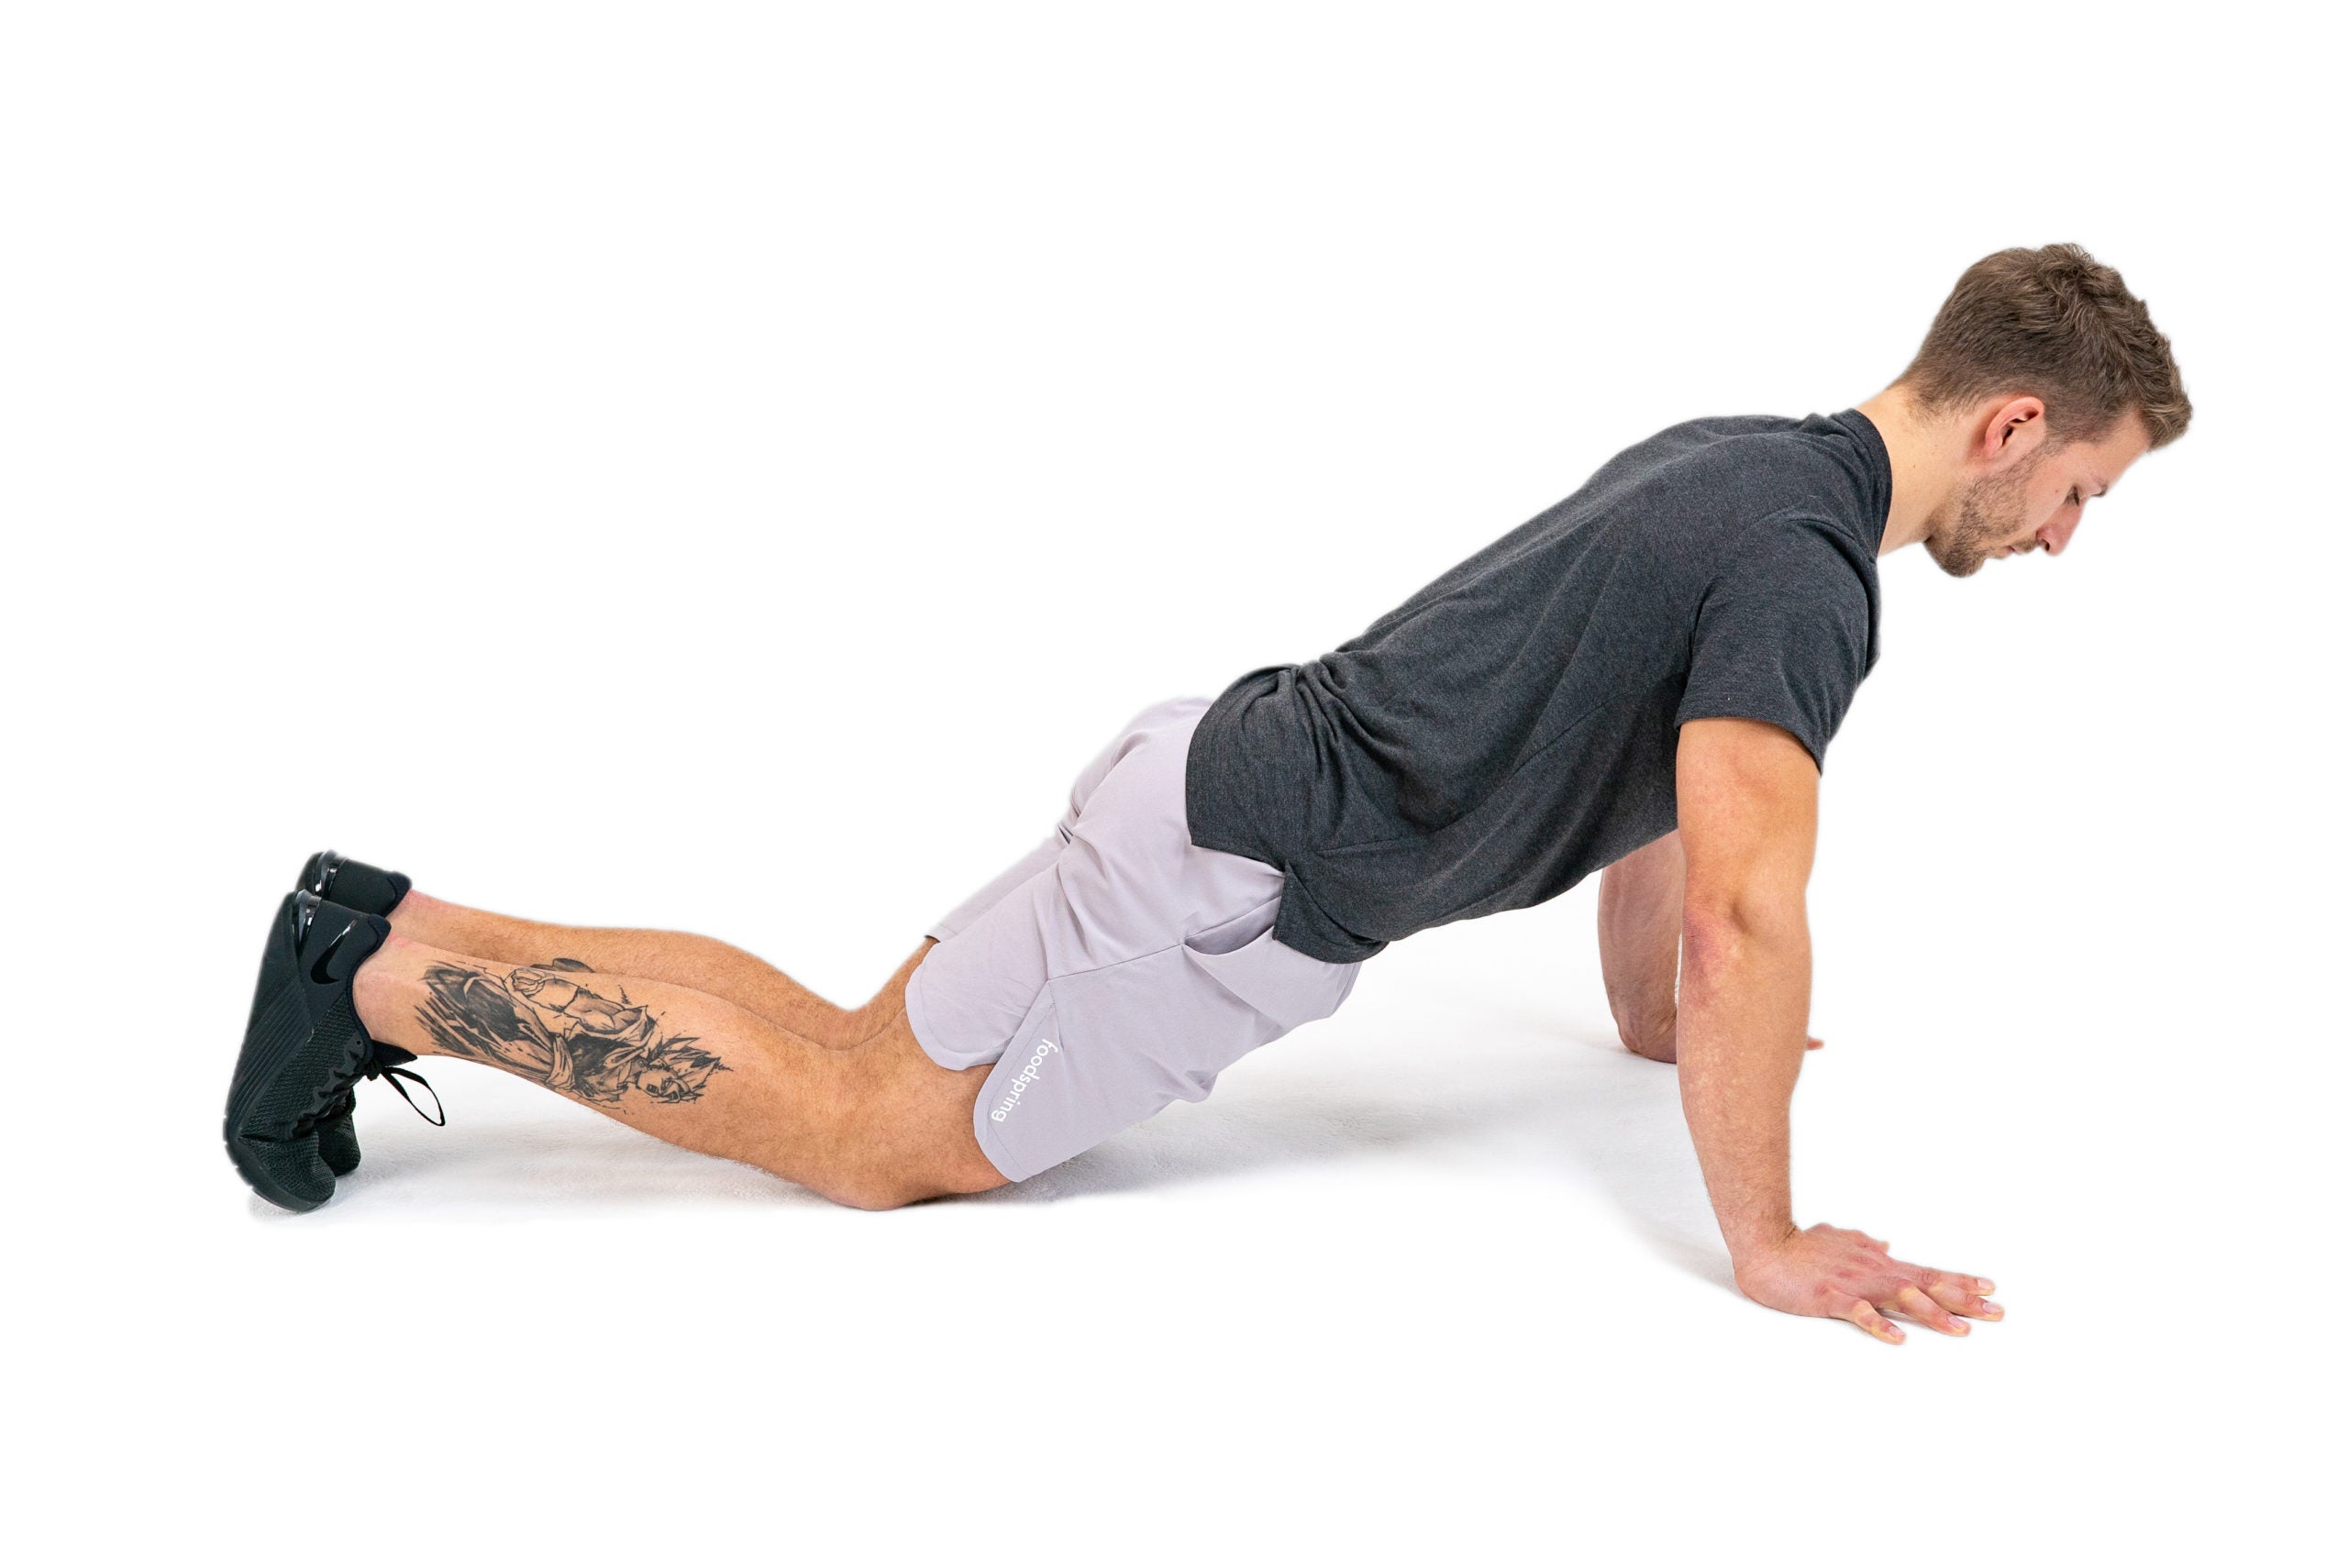 White man in workout gear performs a knee push-up